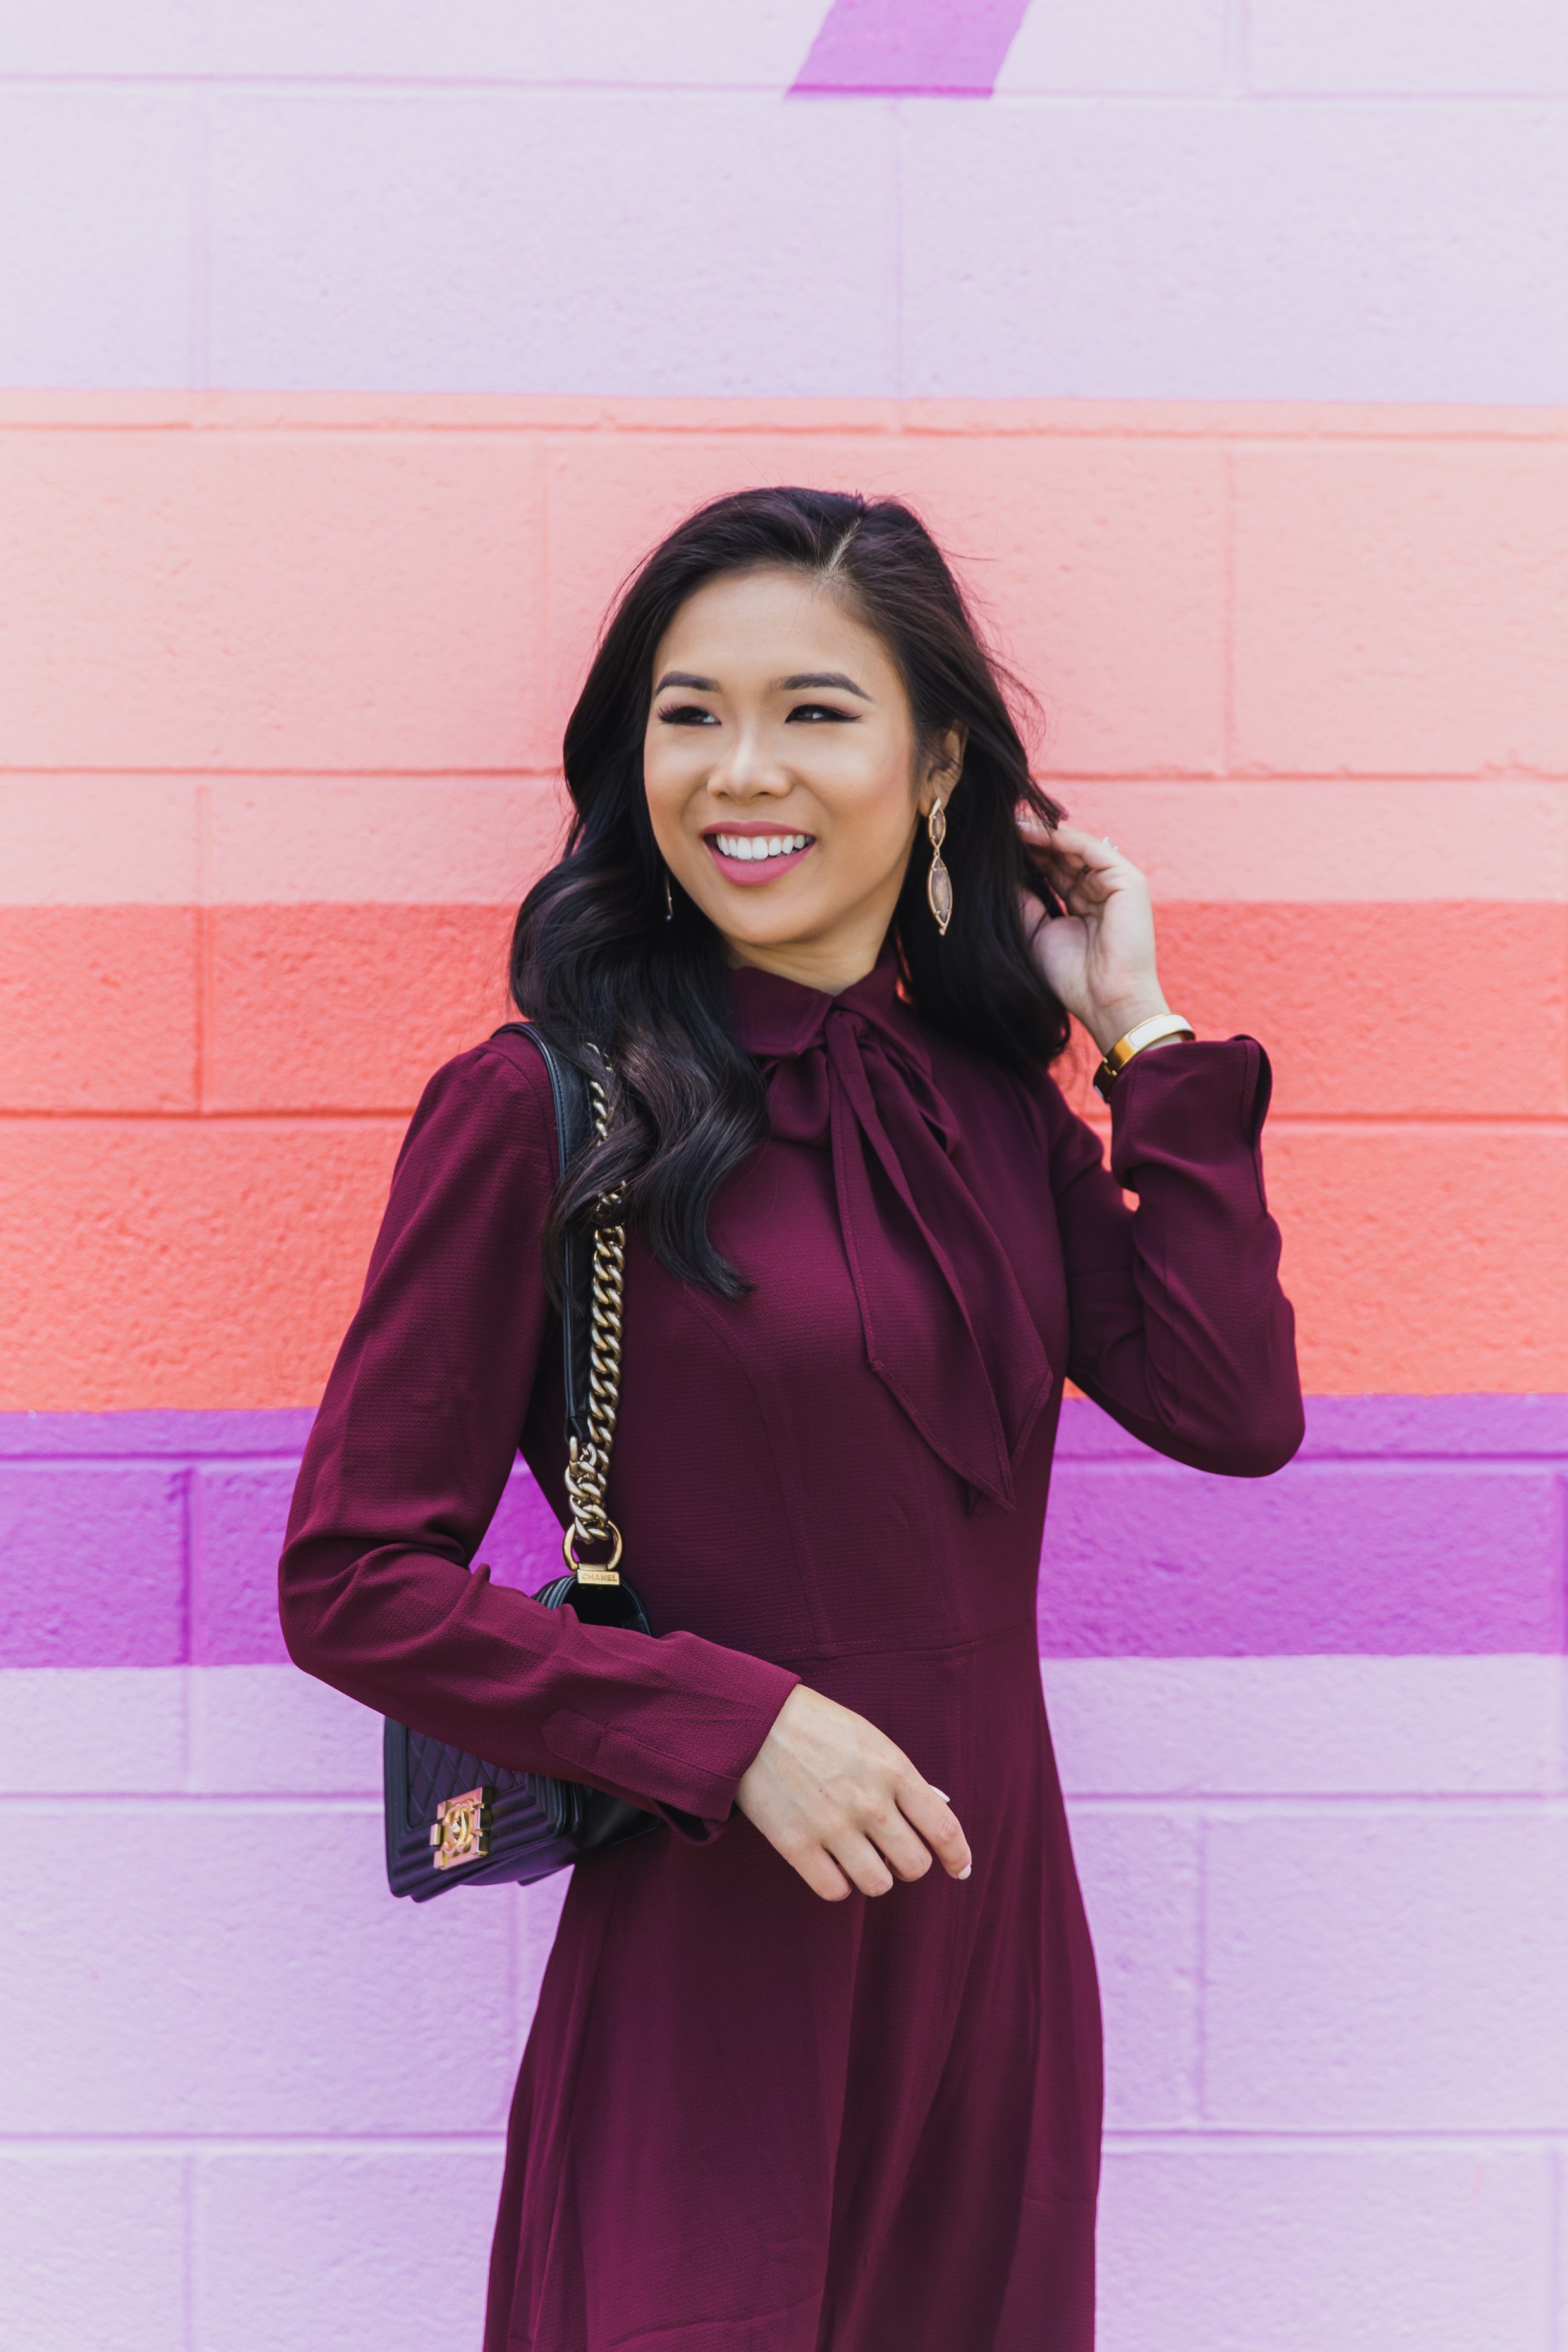 COLOR & CHIC | What I Wear to Work - Burgundy Fit & Flare